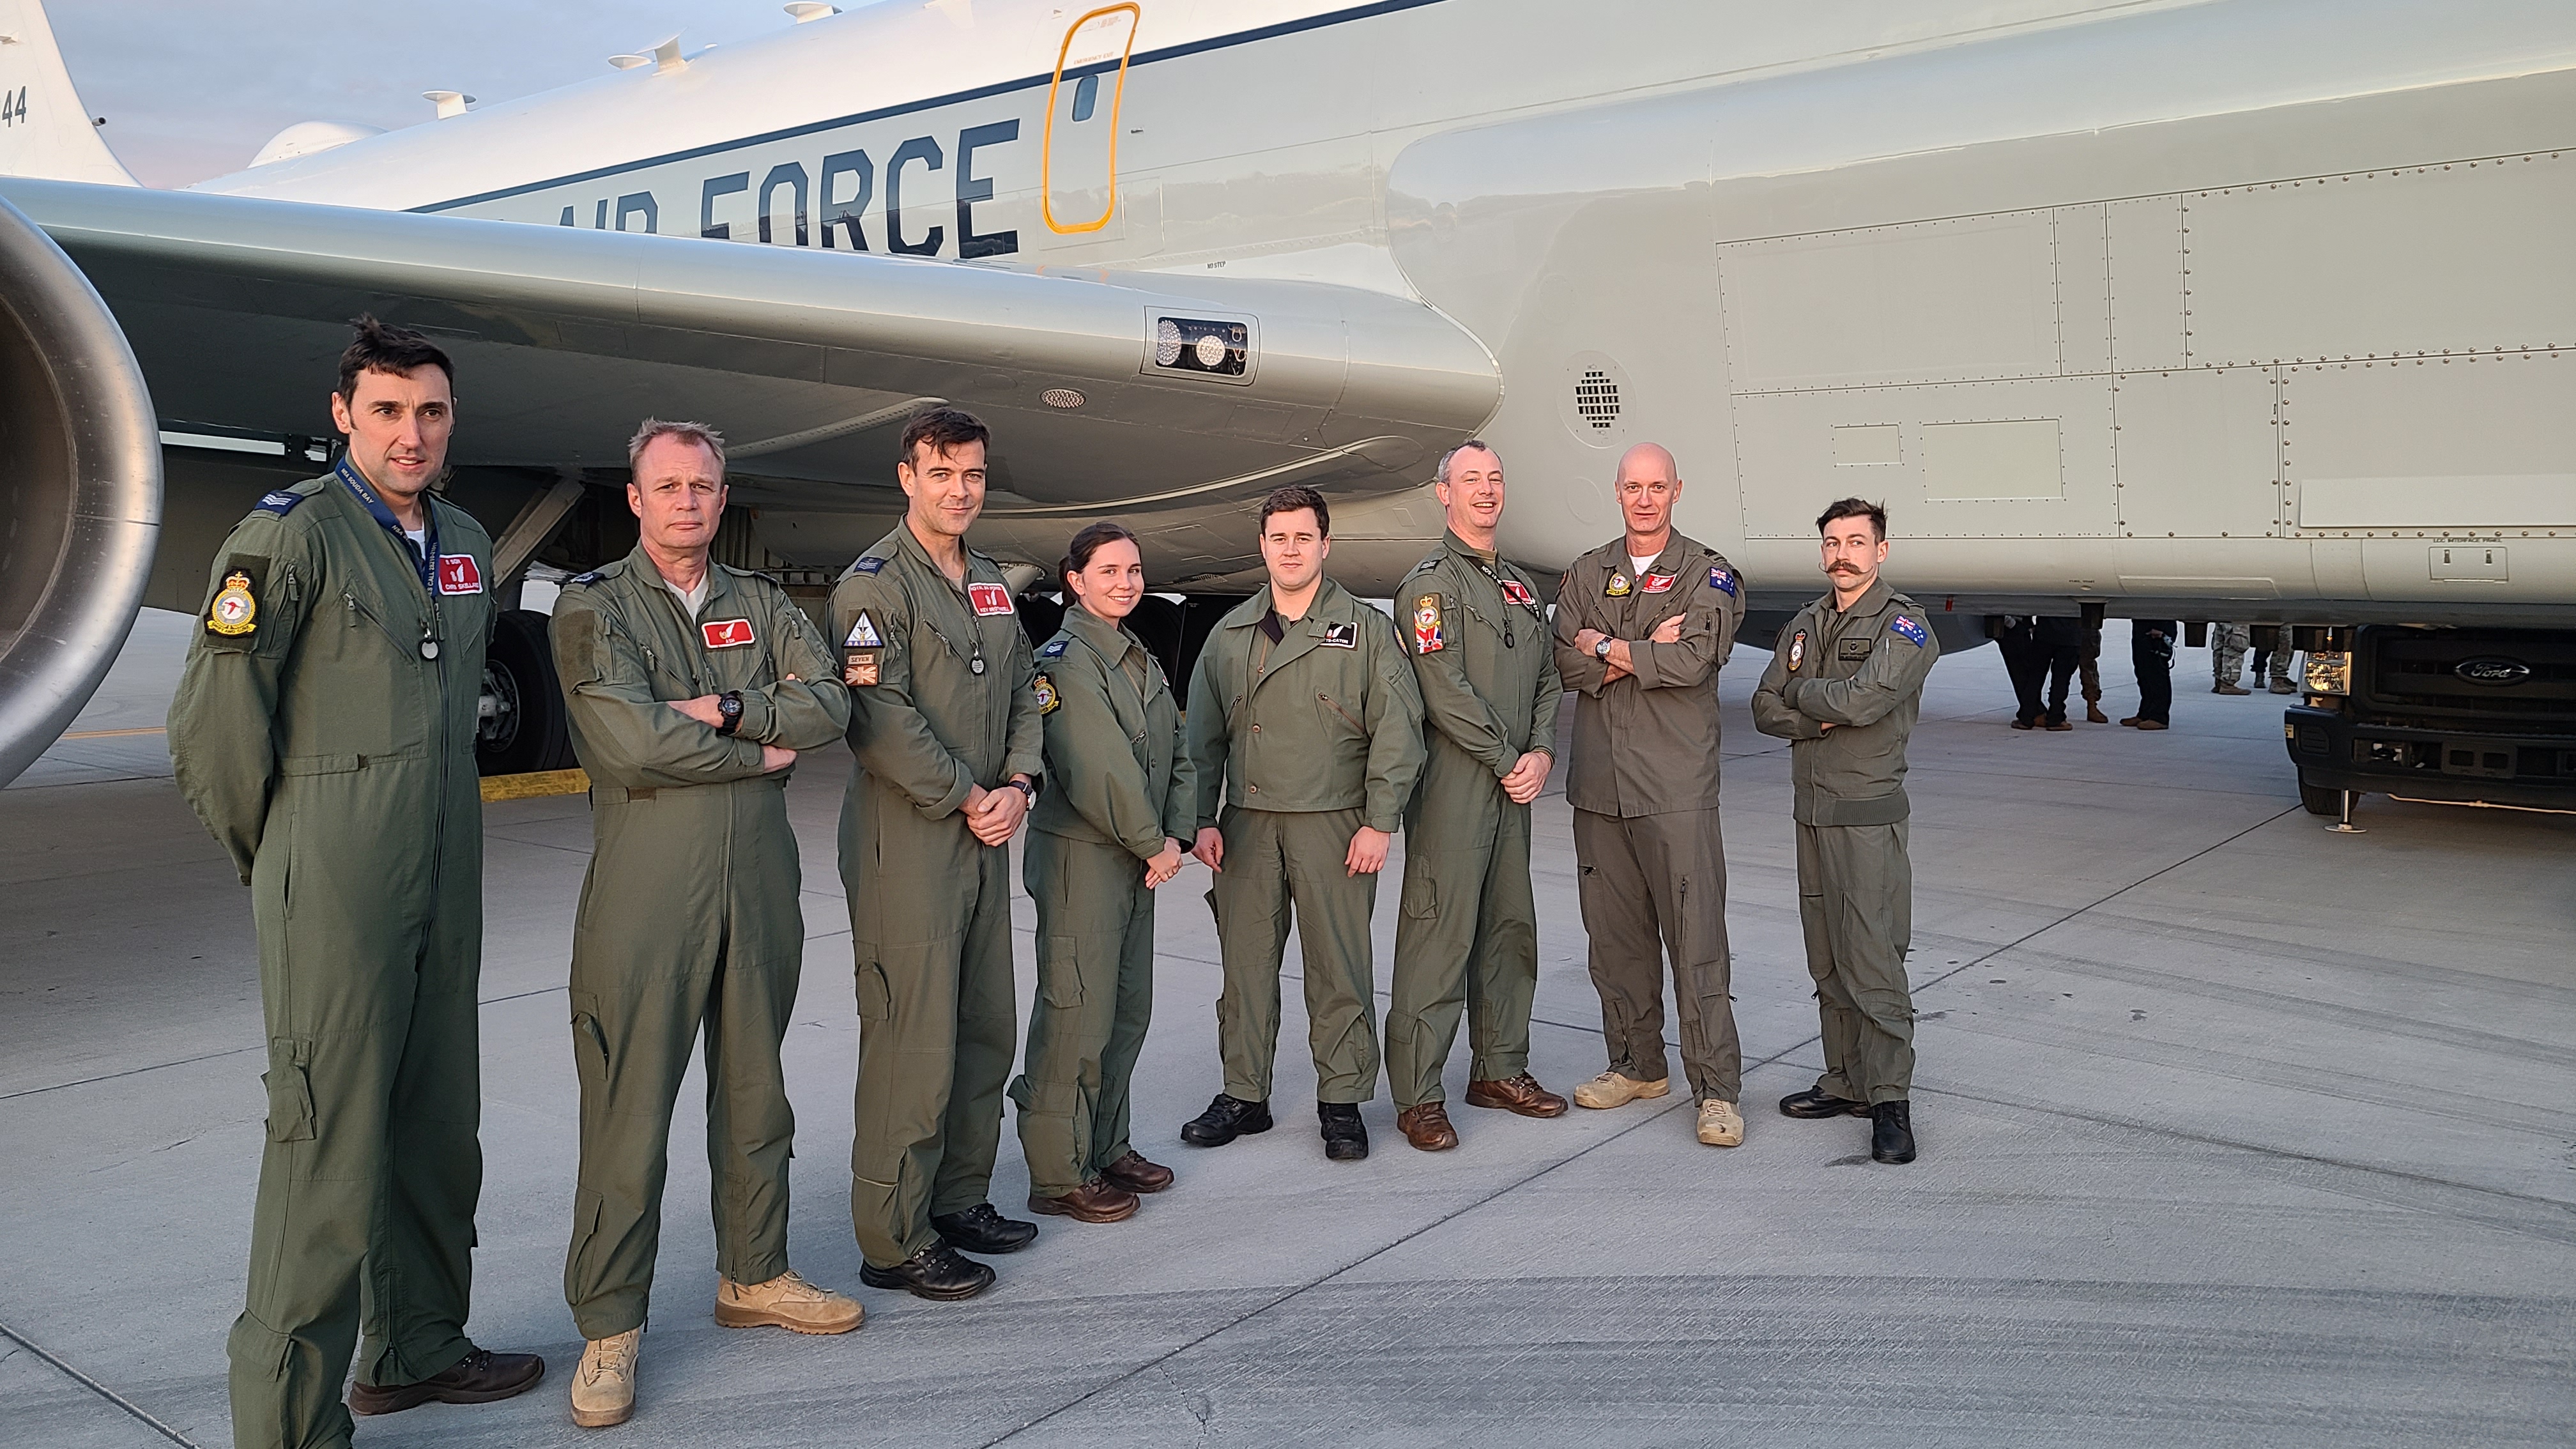 Image shows military personnel standing in front of a Rivet Joint aircraft.